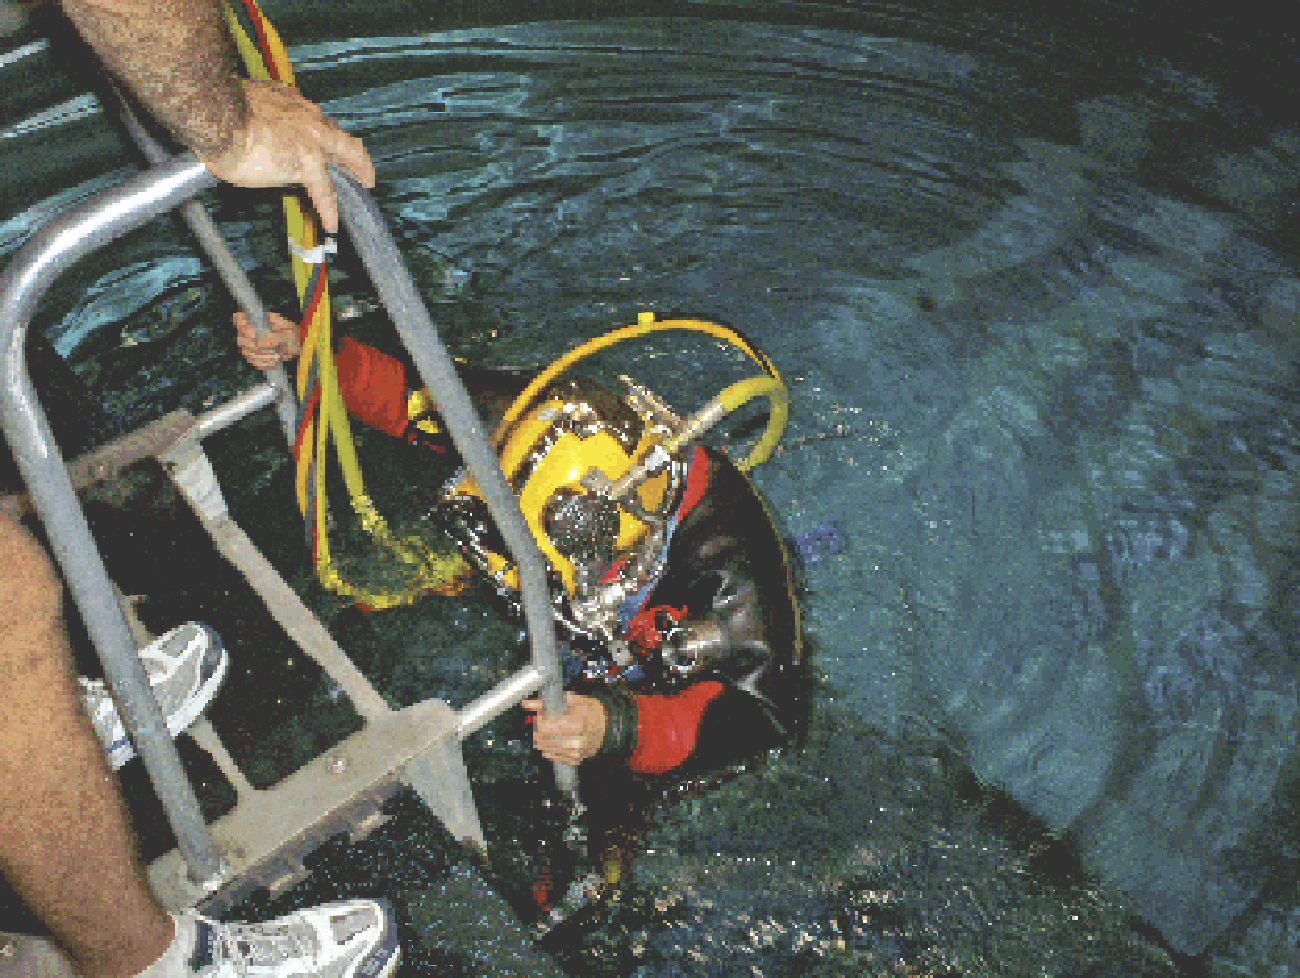 A diver wearing the Paragon suit descends a ladder into the water. 